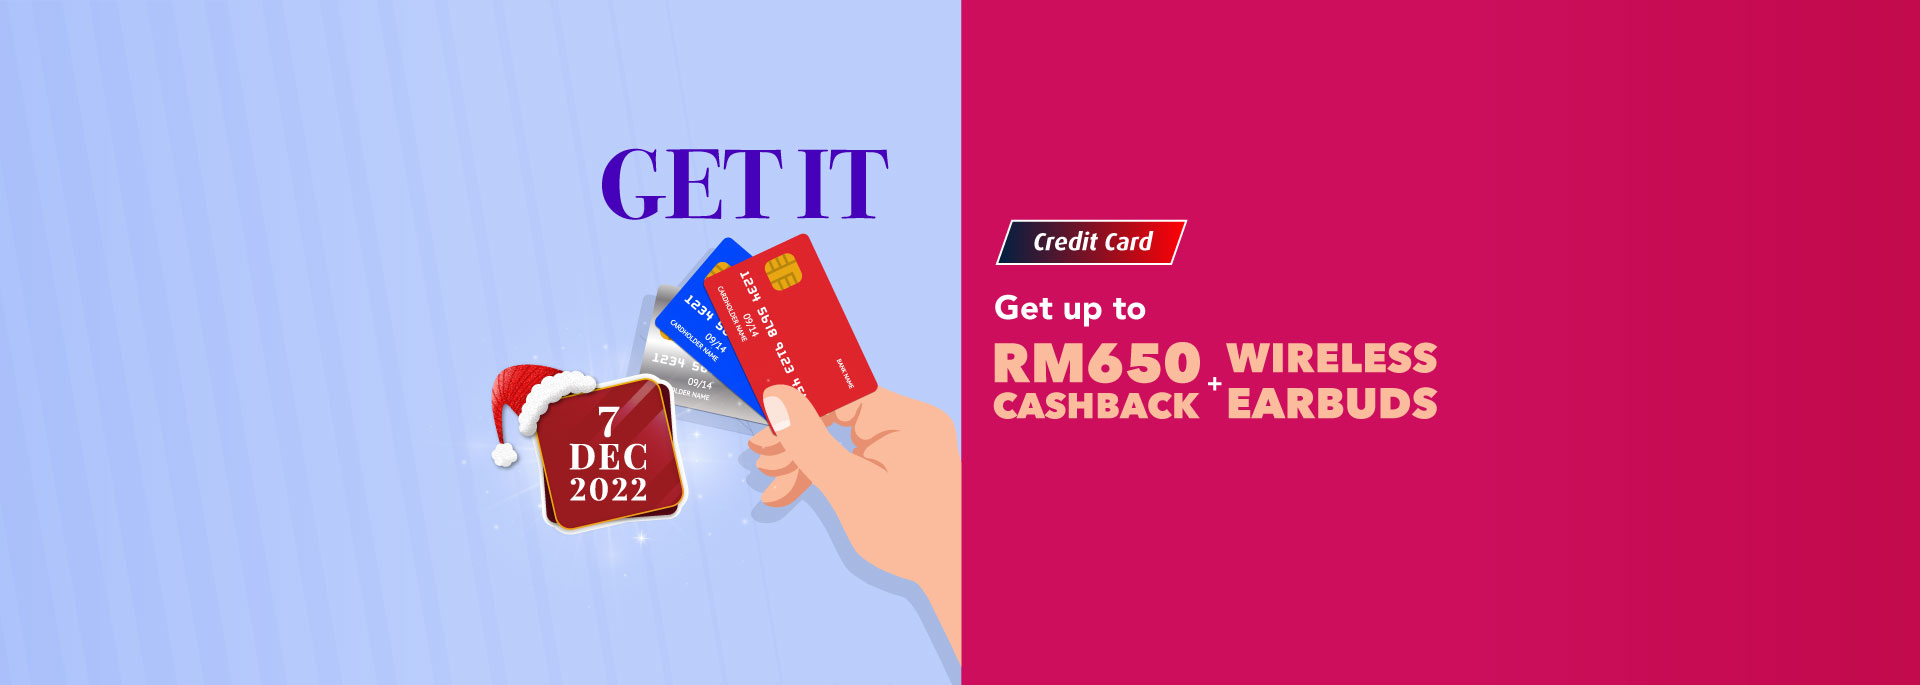 Get up to RM650 Cashback + Wireless Earbuds